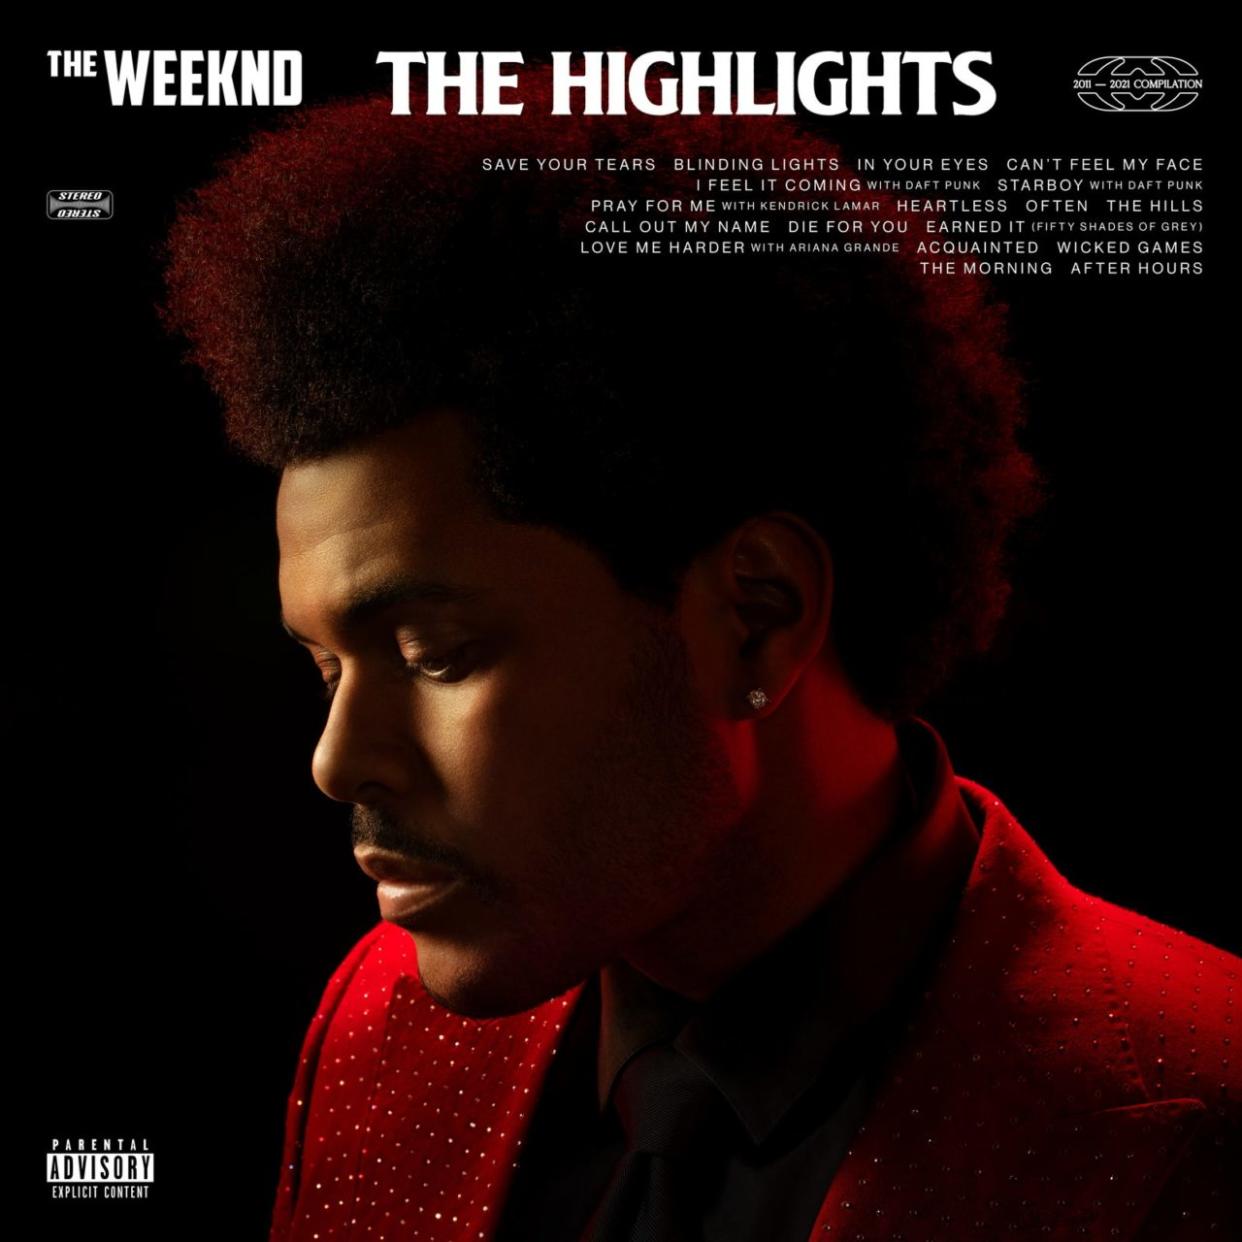 The-Weeknd-The-Highlights-1614109721